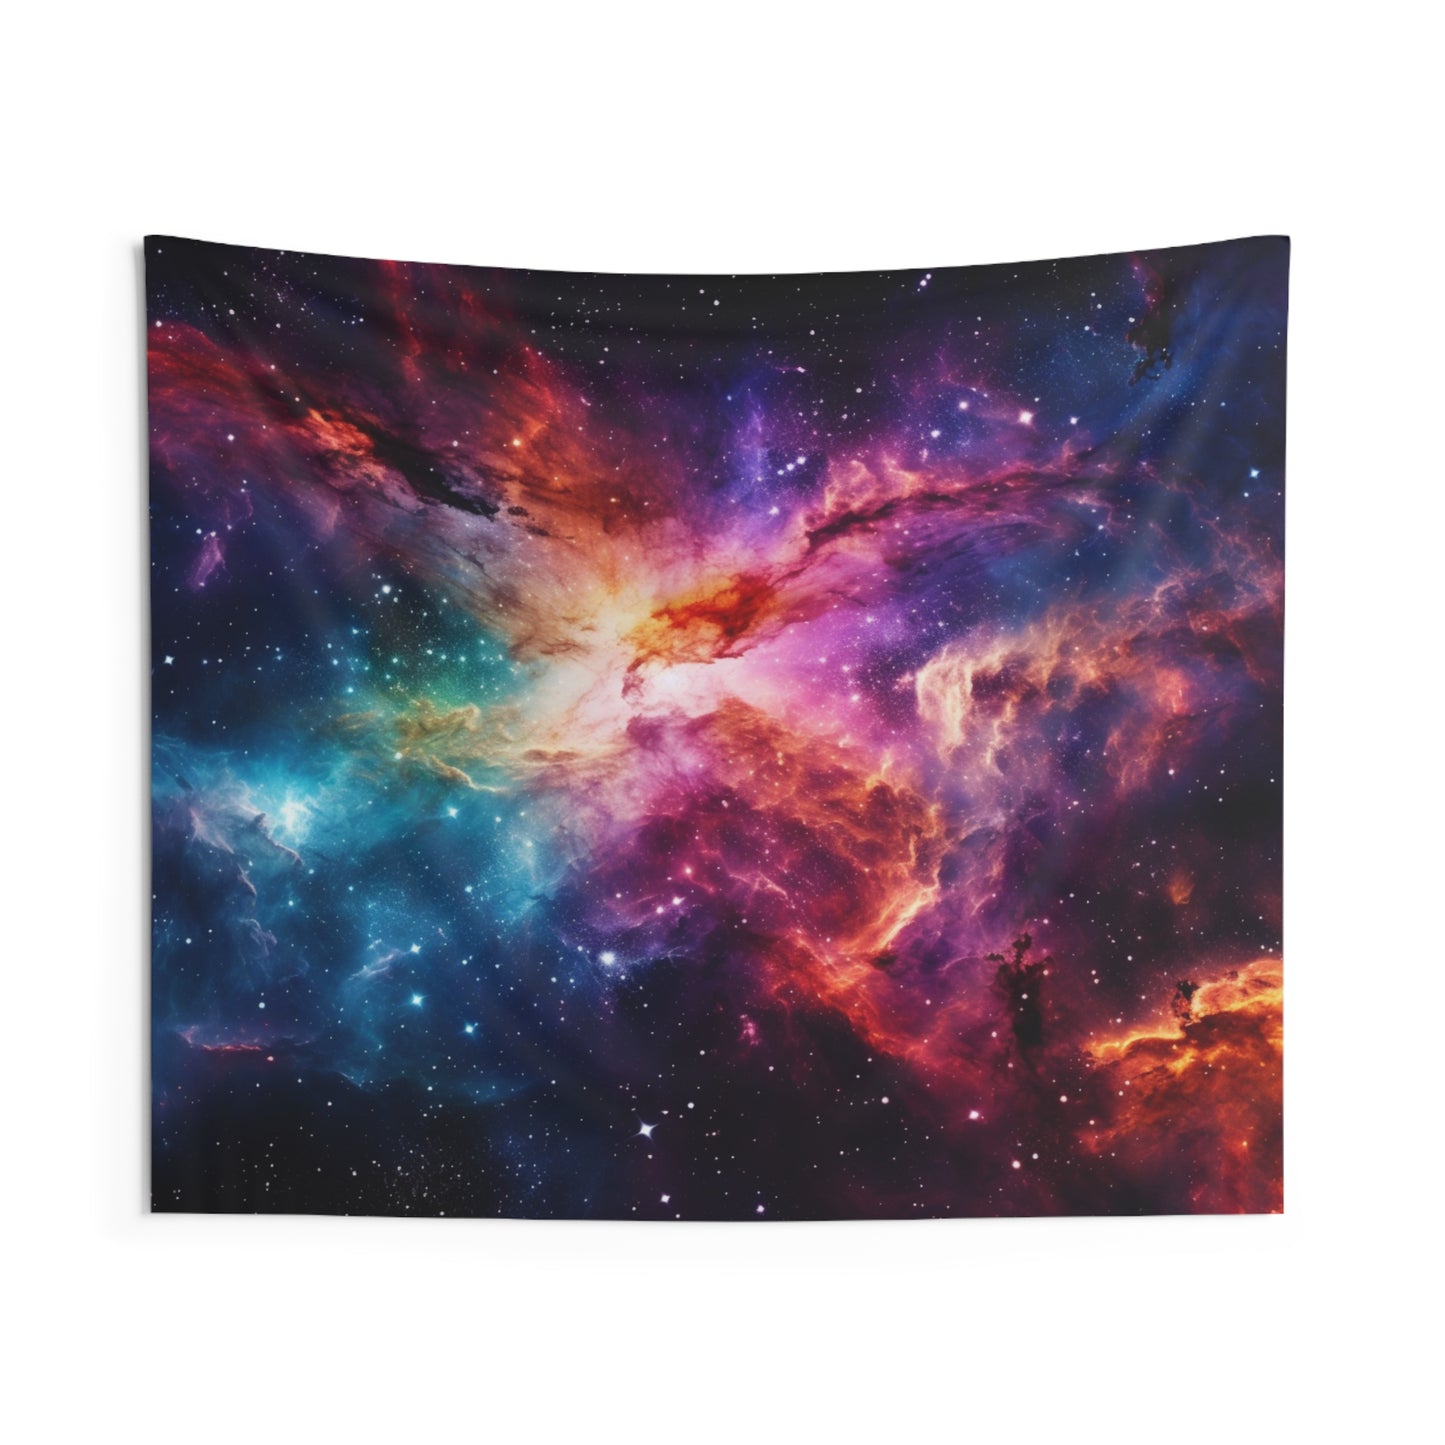 Galaxy Tapestry, Galactic Milky Way Universe Space Wall Art Hanging Cool Unique Landscape Aesthetic Large Small Bedroom College Dorm Starcove Fashion